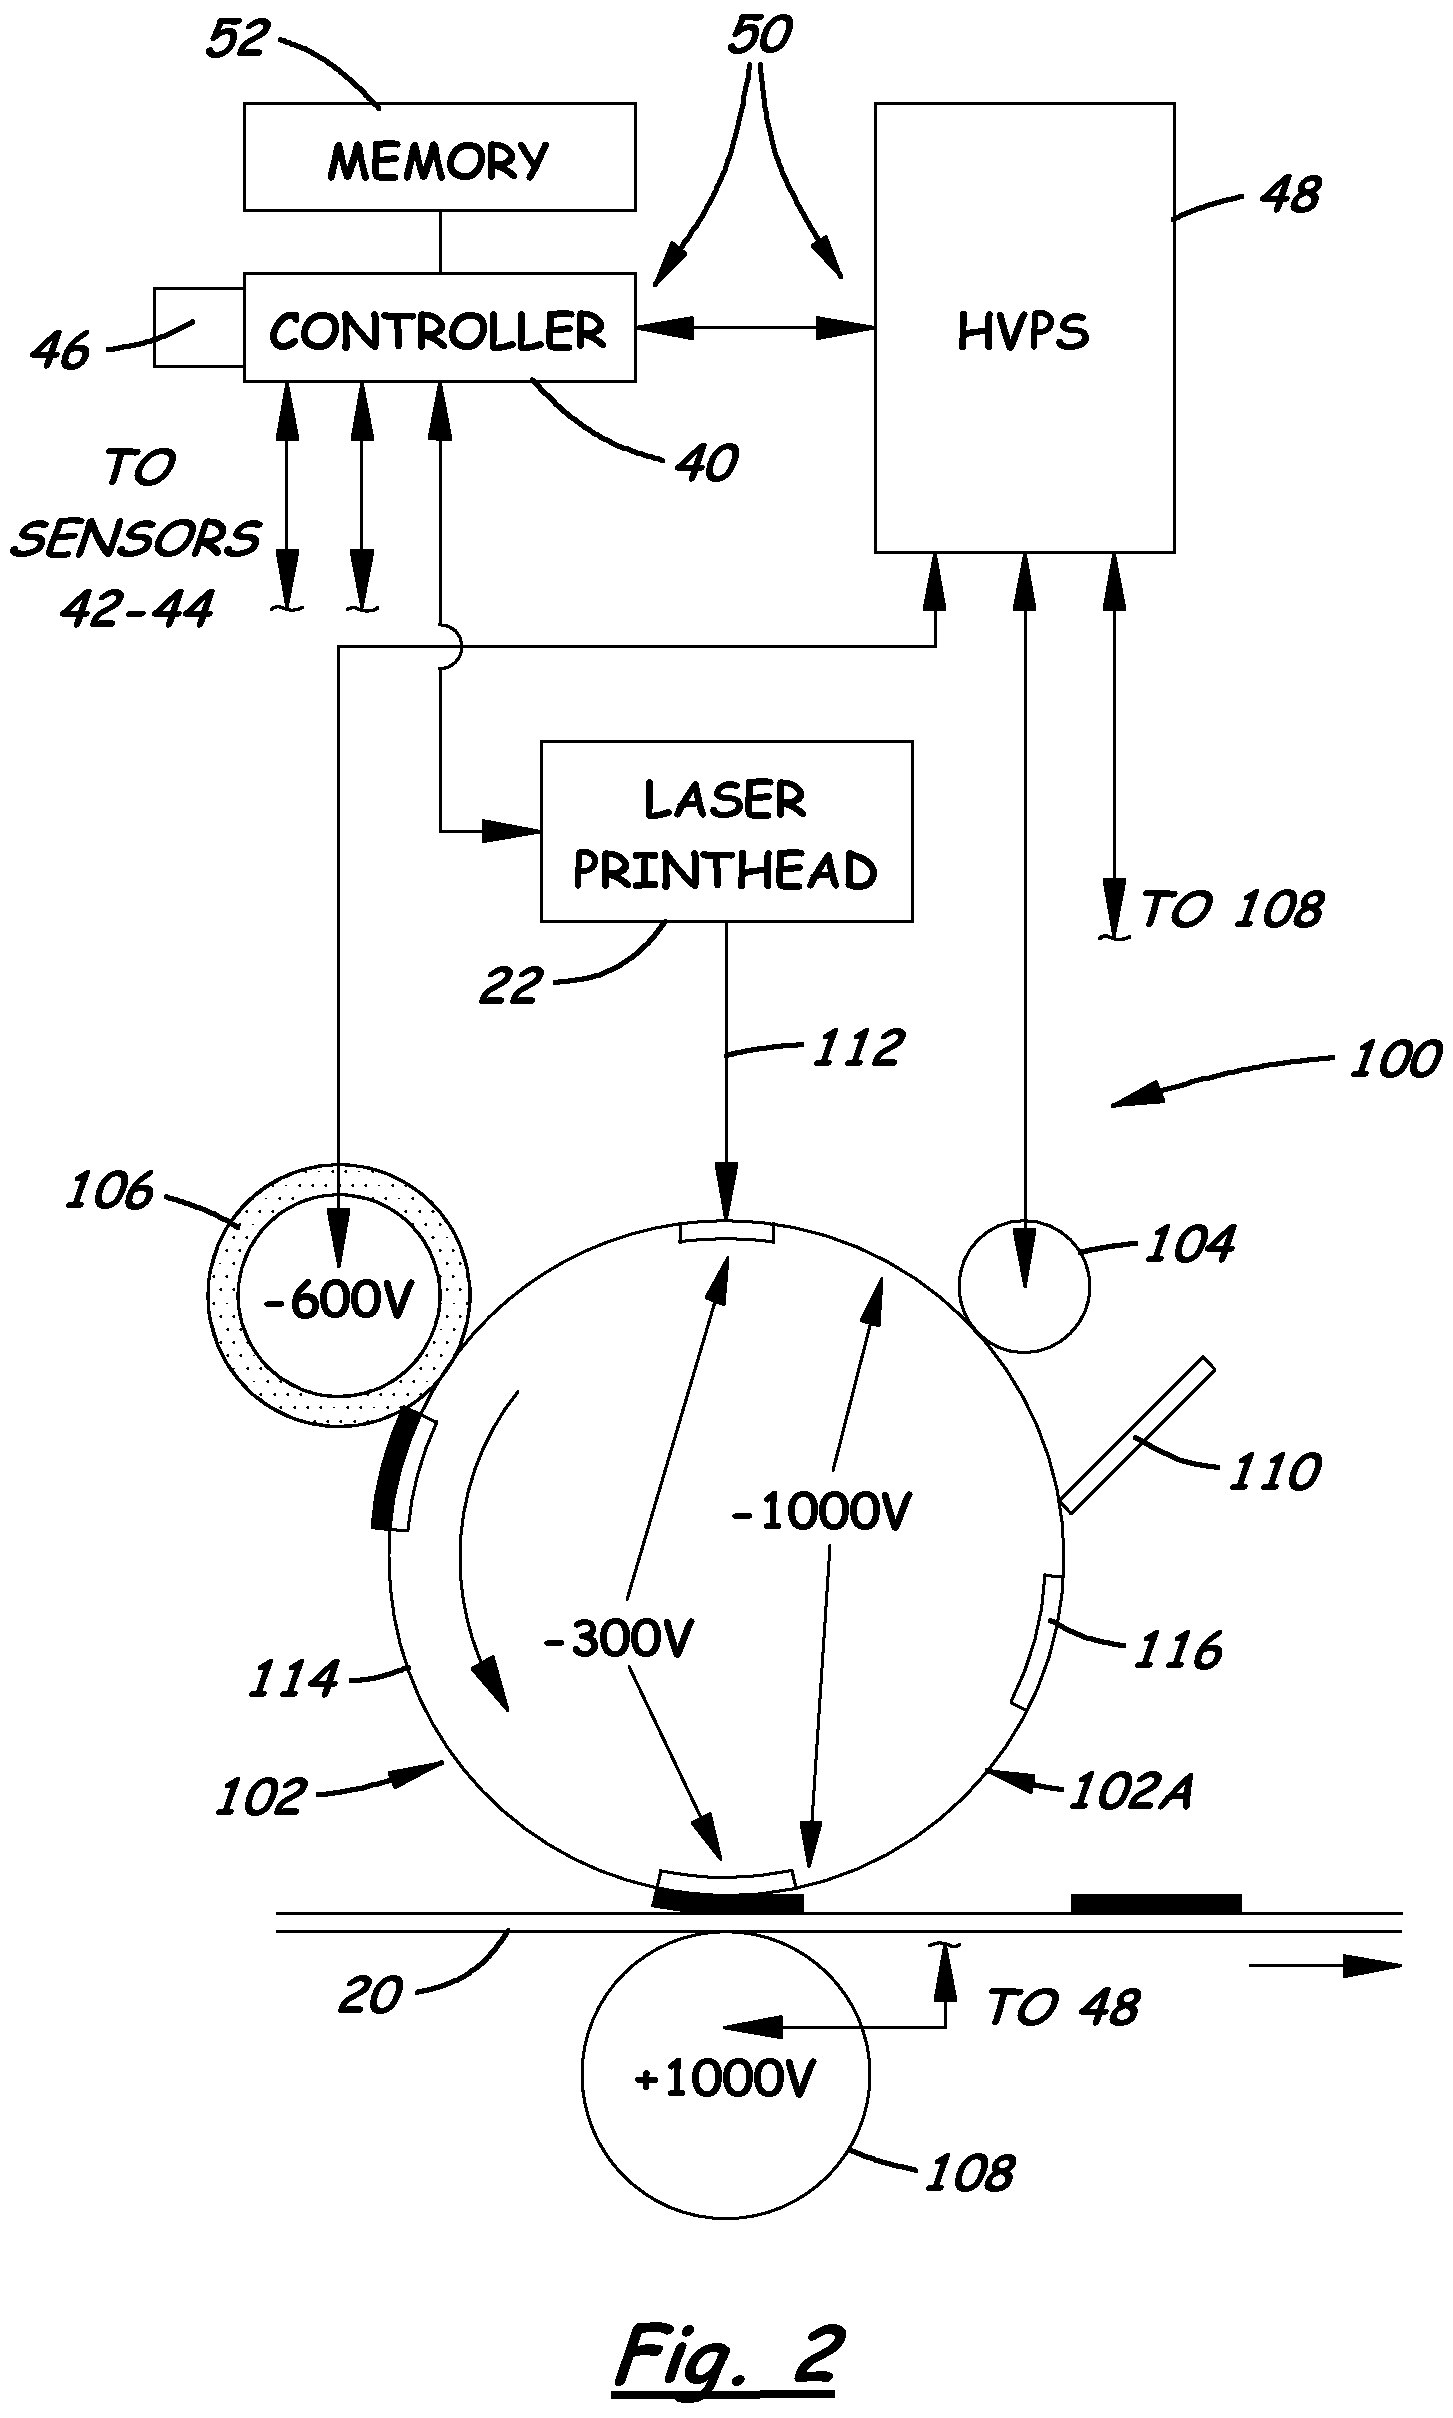 System and Method for Adjusting Selected Operating Parameter of Image Forming Device Based on Selected Environmental Conditions to Control White Vector